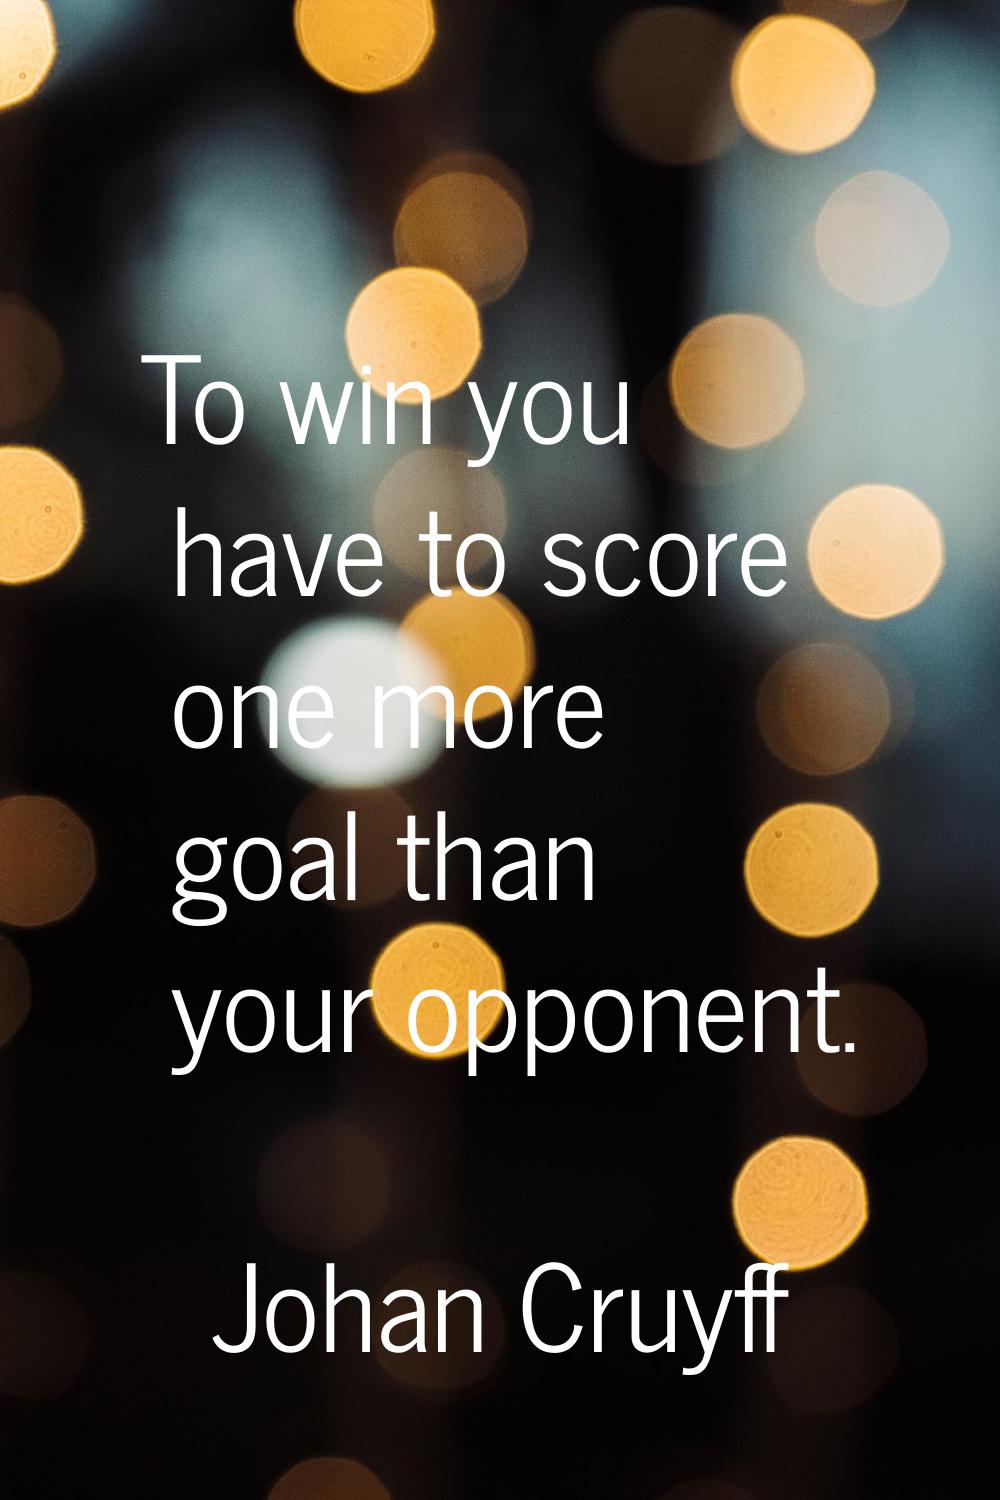 To win you have to score one more goal than your opponent.